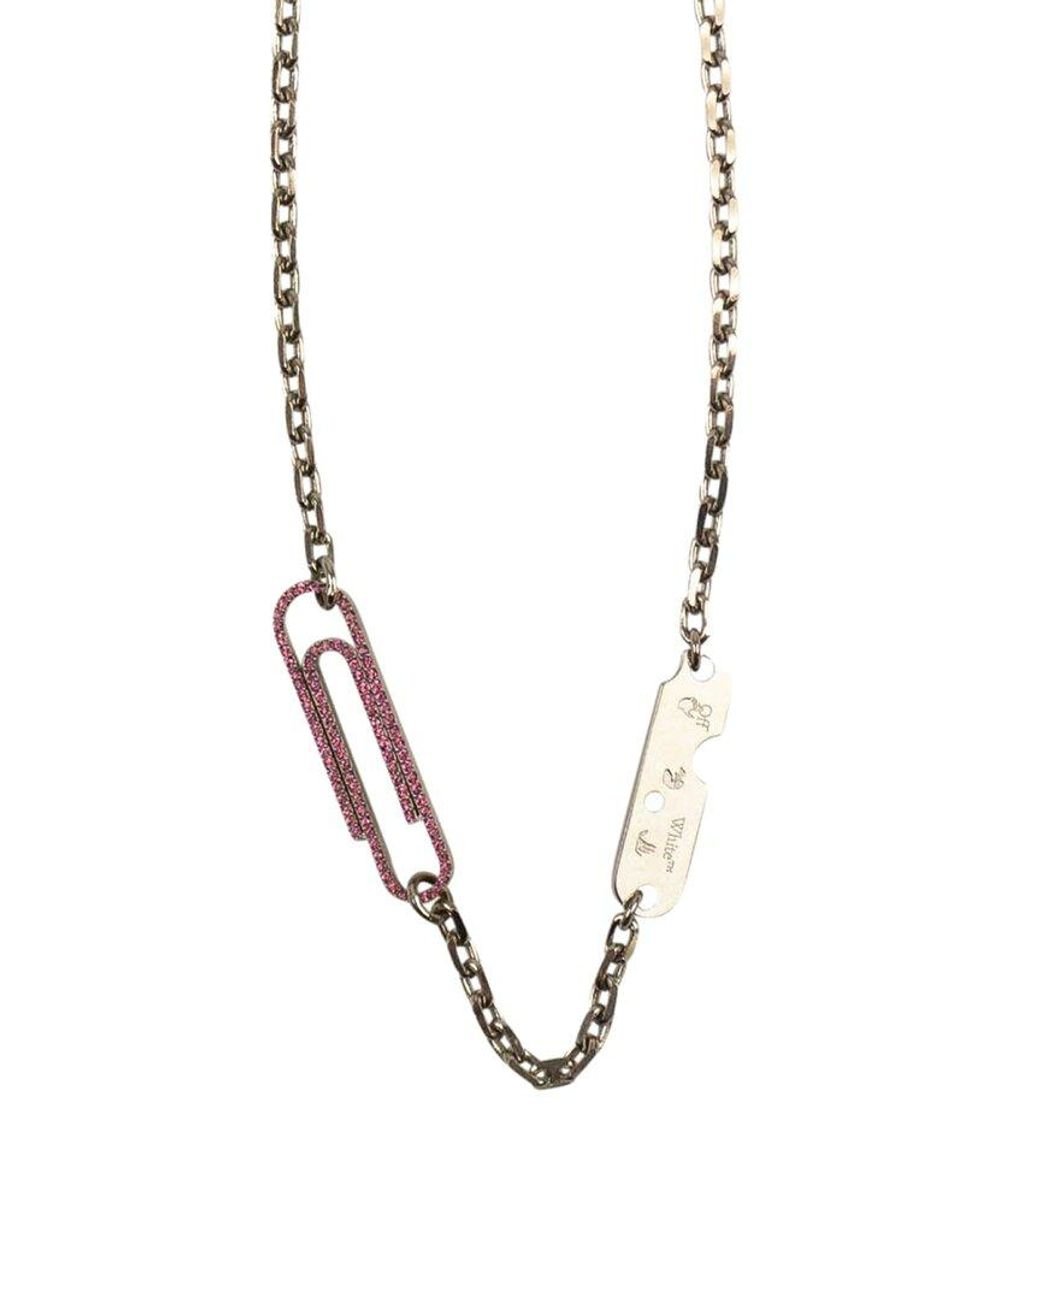 off white paperclip necklace